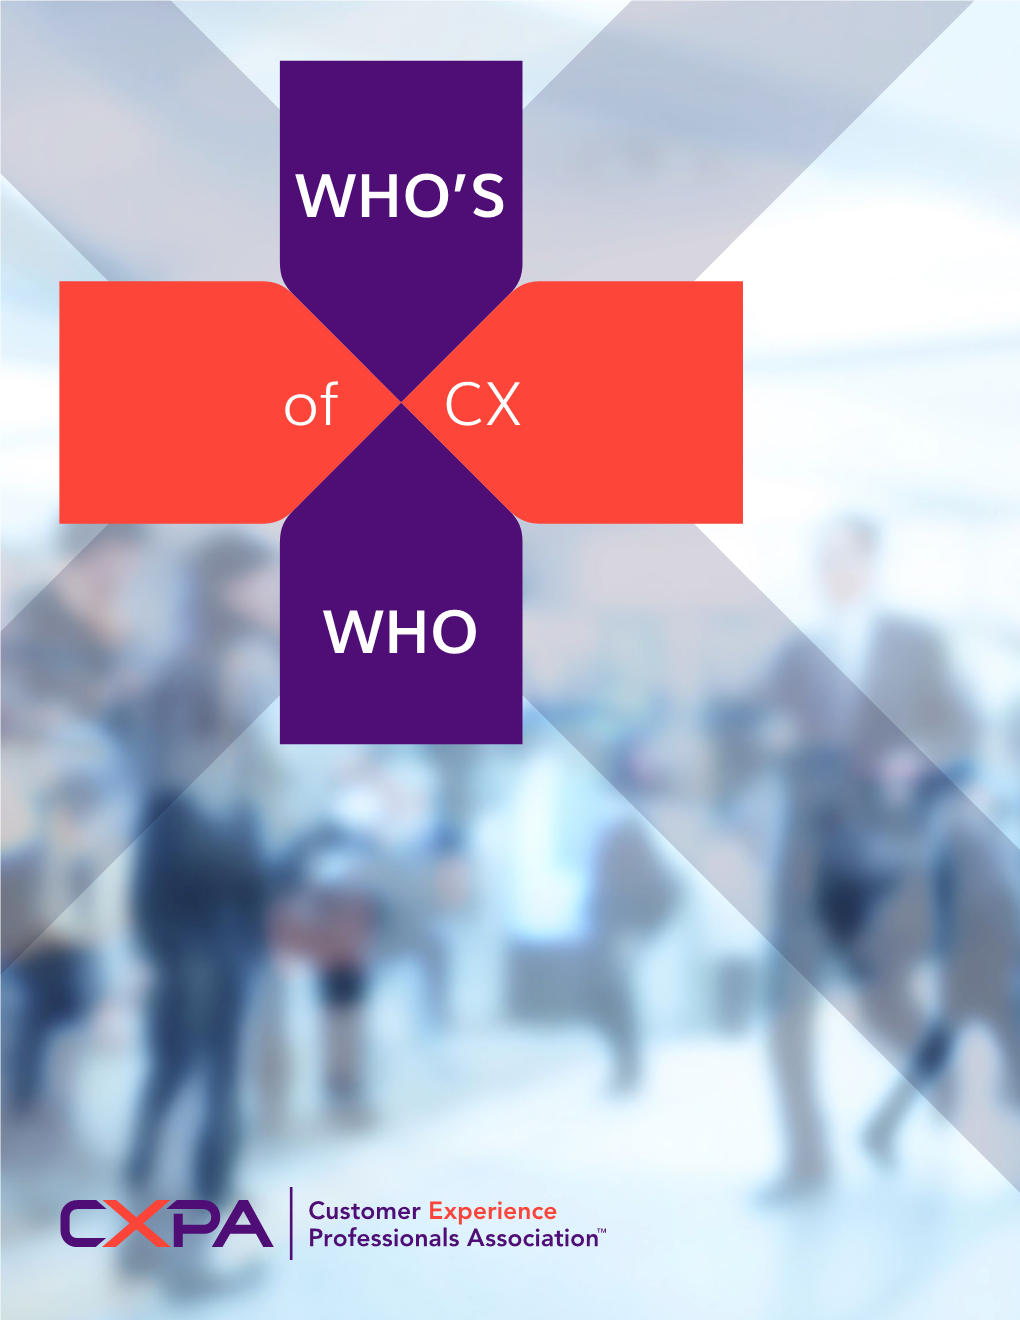 WHO WHO's of CX